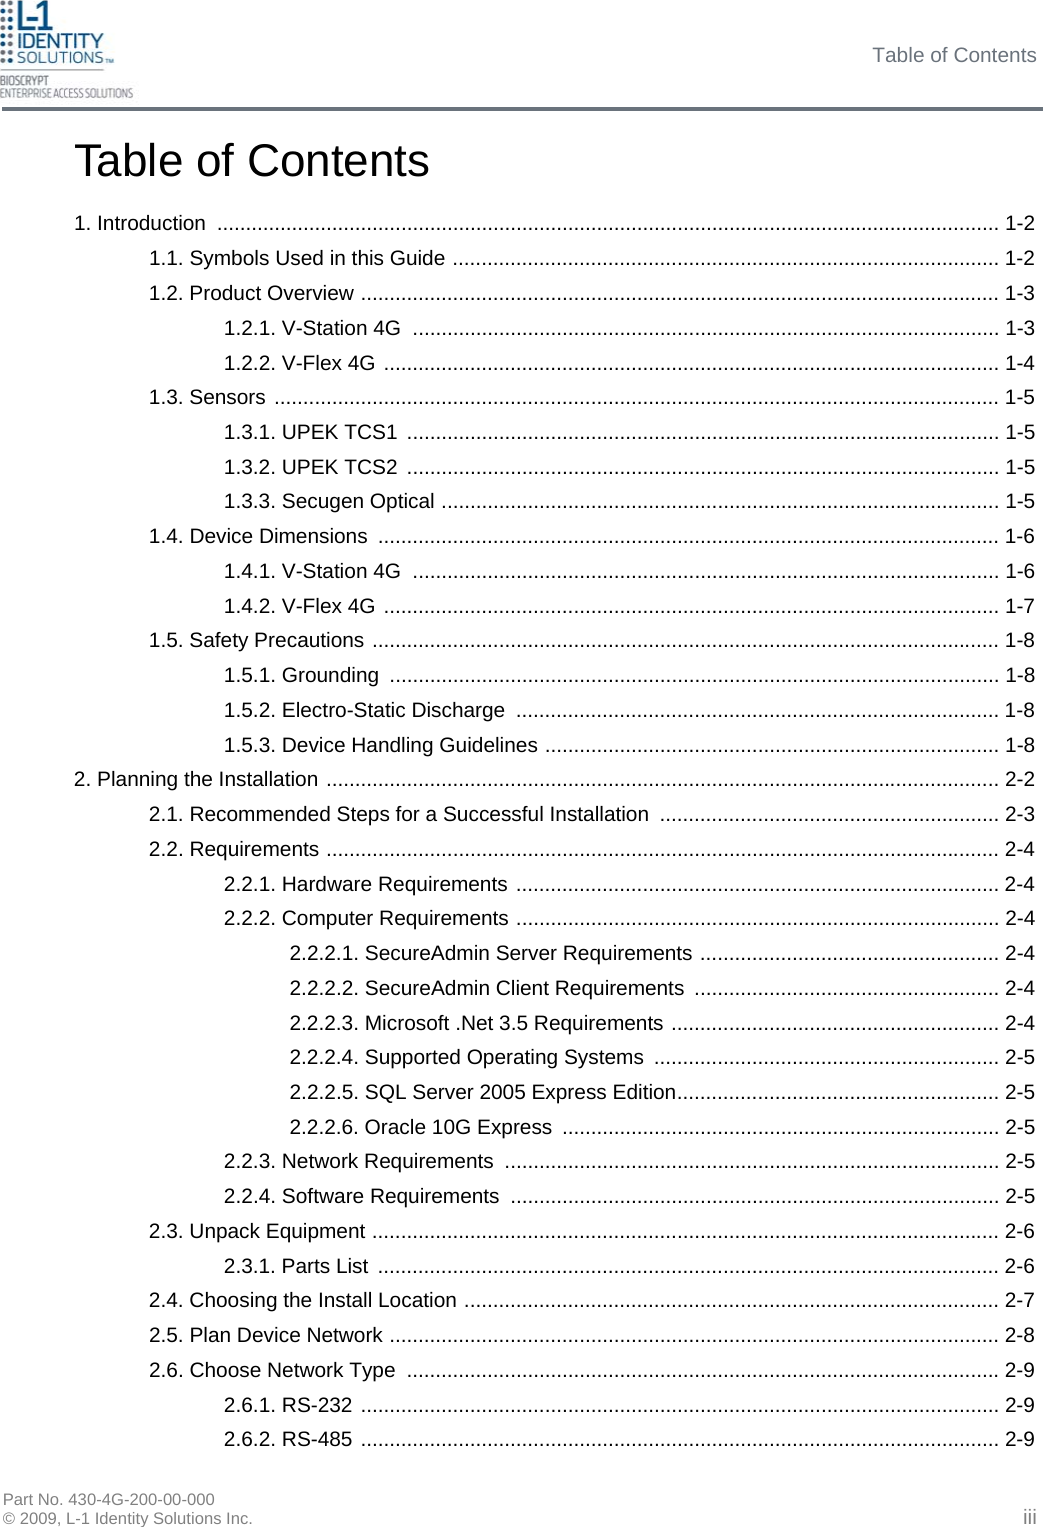 Table of Contents Part No. 430-4G-200-00-000 © 2009, L-1 Identity Solutions Inc. Table of Contents 1. Introduction ........................................................................................................................................ 1-2 1.1. Symbols Used in this Guide ............................................................................................... 1-2 1.2. Product Overview ............................................................................................................... 1-3 1.2.1. V-Station 4G  ...................................................................................................... 1-3 1.2.2. V-Flex 4G ........................................................................................................... 1-4 1.3. Sensors .............................................................................................................................. 1-5 1.3.1. UPEK TCS1  ....................................................................................................... 1-5 1.3.2. UPEK TCS2  ....................................................................................................... 1-5 1.3.3. Secugen Optical ................................................................................................. 1-5 1.4. Device Dimensions ............................................................................................................ 1-6 1.4.1. V-Station 4G  ...................................................................................................... 1-6 1.4.2. V-Flex 4G ........................................................................................................... 1-7 1.5. Safety Precautions ............................................................................................................. 1-8 1.5.1. Grounding  .......................................................................................................... 1-8 1.5.2. Electro-Static Discharge .................................................................................... 1-8 1.5.3. Device Handling Guidelines ............................................................................... 1-8 2. Planning the Installation ..................................................................................................................... 2-2 2.1. Recommended Steps for a Successful Installation ........................................................... 2-3 2.2. Requirements ..................................................................................................................... 2-4 2.2.1. Hardware Requirements .................................................................................... 2-4 2.2.2. Computer Requirements .................................................................................... 2-4 2.2.2.1. SecureAdmin Server Requirements .................................................... 2-4 2.2.2.2. SecureAdmin Client Requirements  ..................................................... 2-4 2.2.2.3. Microsoft .Net 3.5 Requirements ......................................................... 2-4 2.2.2.4. Supported Operating Systems ............................................................ 2-5 2.2.2.5. SQL Server 2005 Express Edition........................................................ 2-5 2.2.2.6. Oracle 10G Express ............................................................................ 2-5 2.2.3. Network Requirements ...................................................................................... 2-5 2.2.4. Software Requirements ..................................................................................... 2-5 2.3. Unpack Equipment ............................................................................................................. 2-6 2.3.1. Parts List  ............................................................................................................ 2-6 2.4. Choosing the Install Location ............................................................................................. 2-7 2.5. Plan Device Network .......................................................................................................... 2-8 2.6. Choose Network Type  ....................................................................................................... 2-9 2.6.1. RS-232 ............................................................................................................... 2-9 2.6.2. RS-485 ............................................................................................................... 2-9 iii 